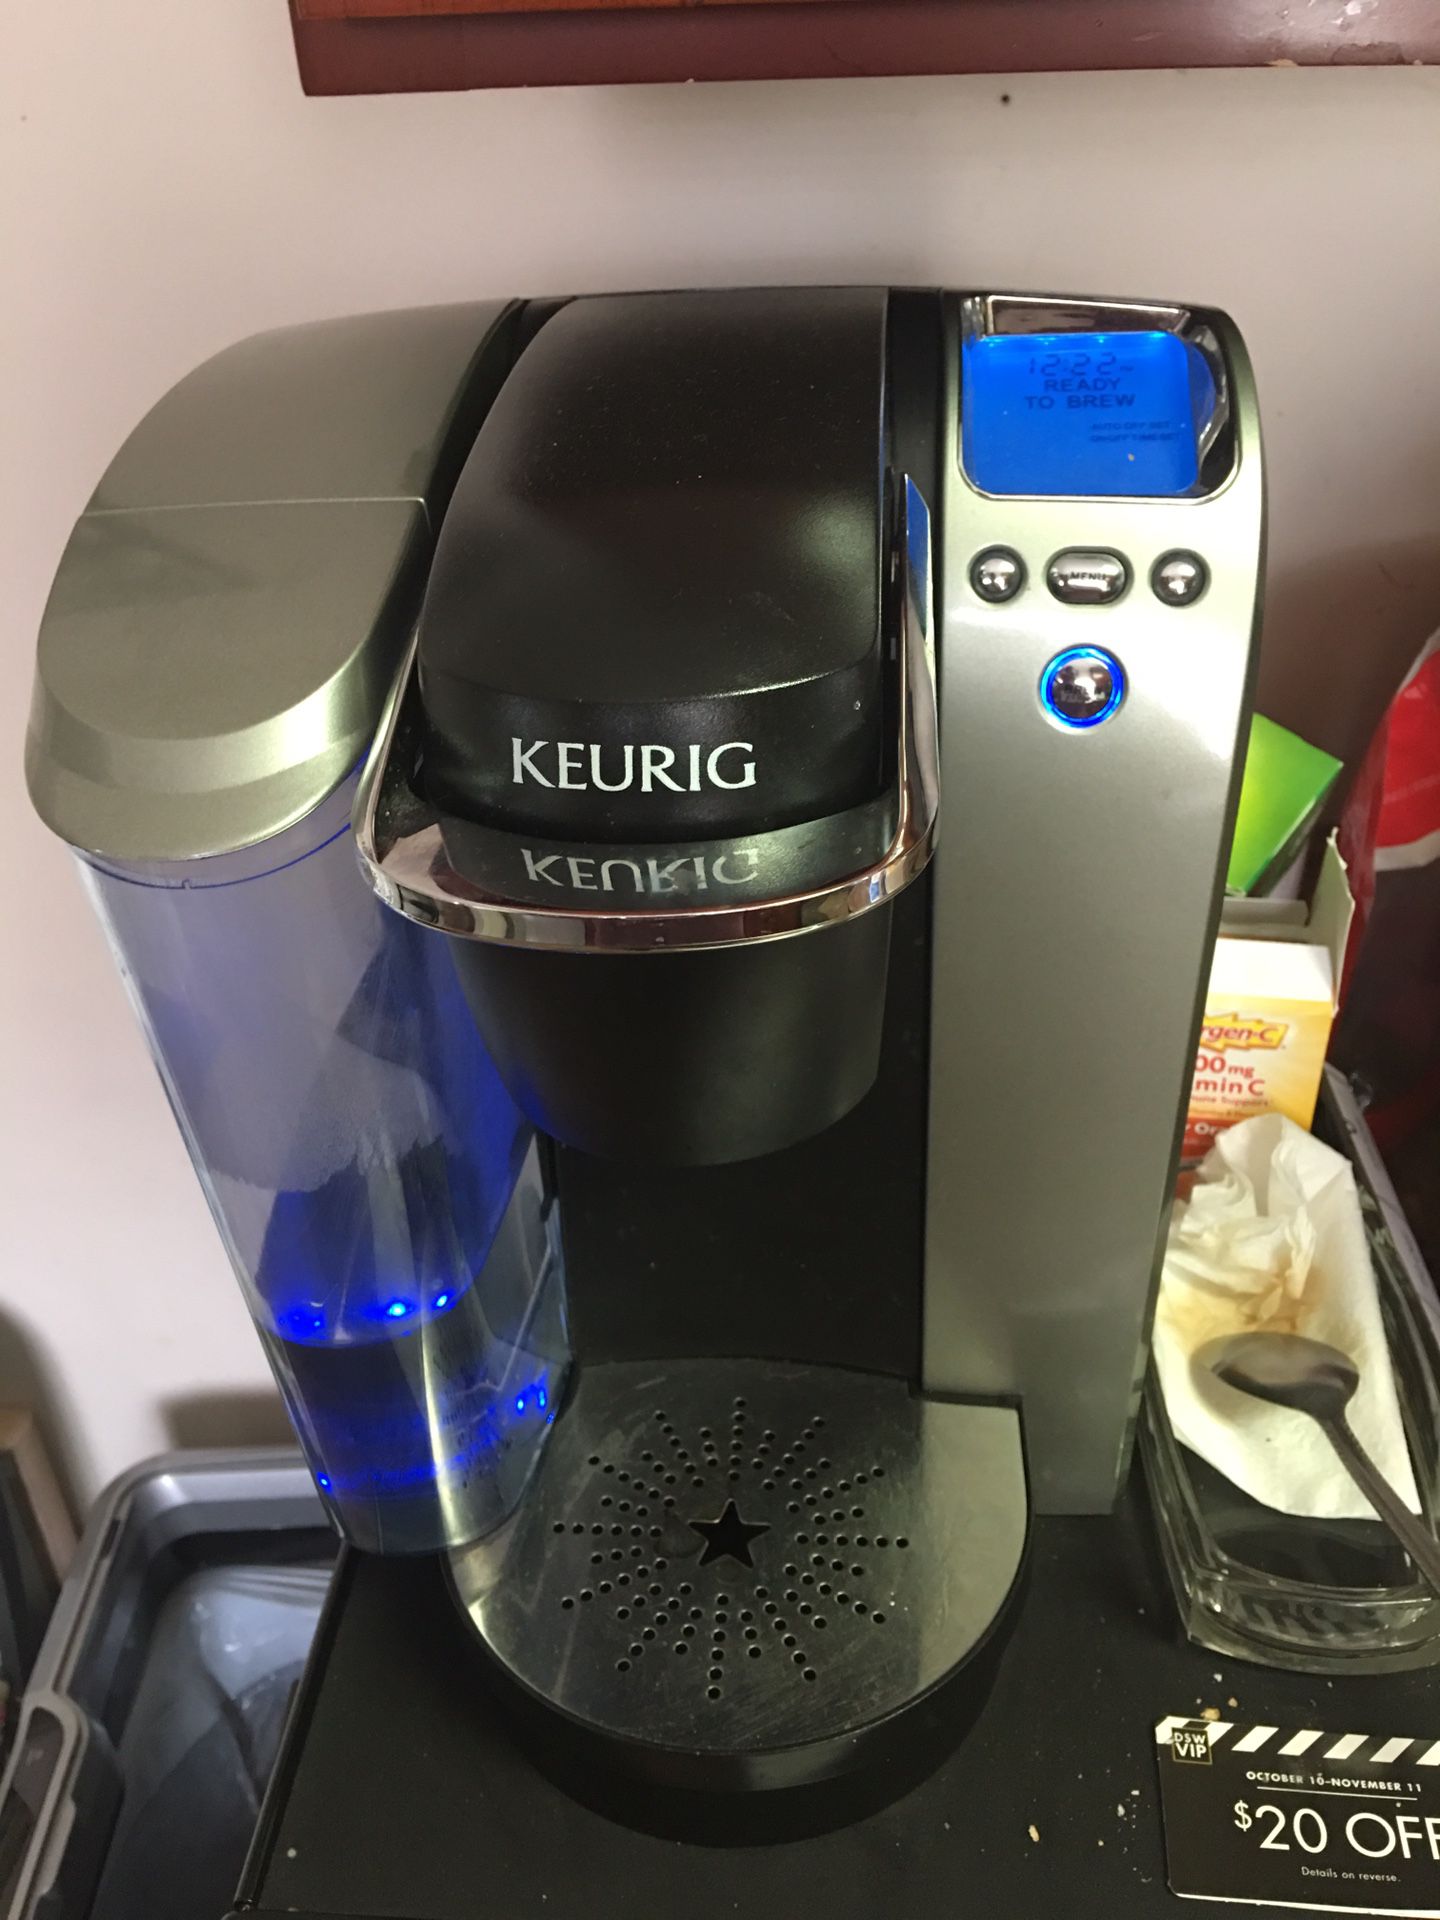 Keurig excellent condition Covid Free Home